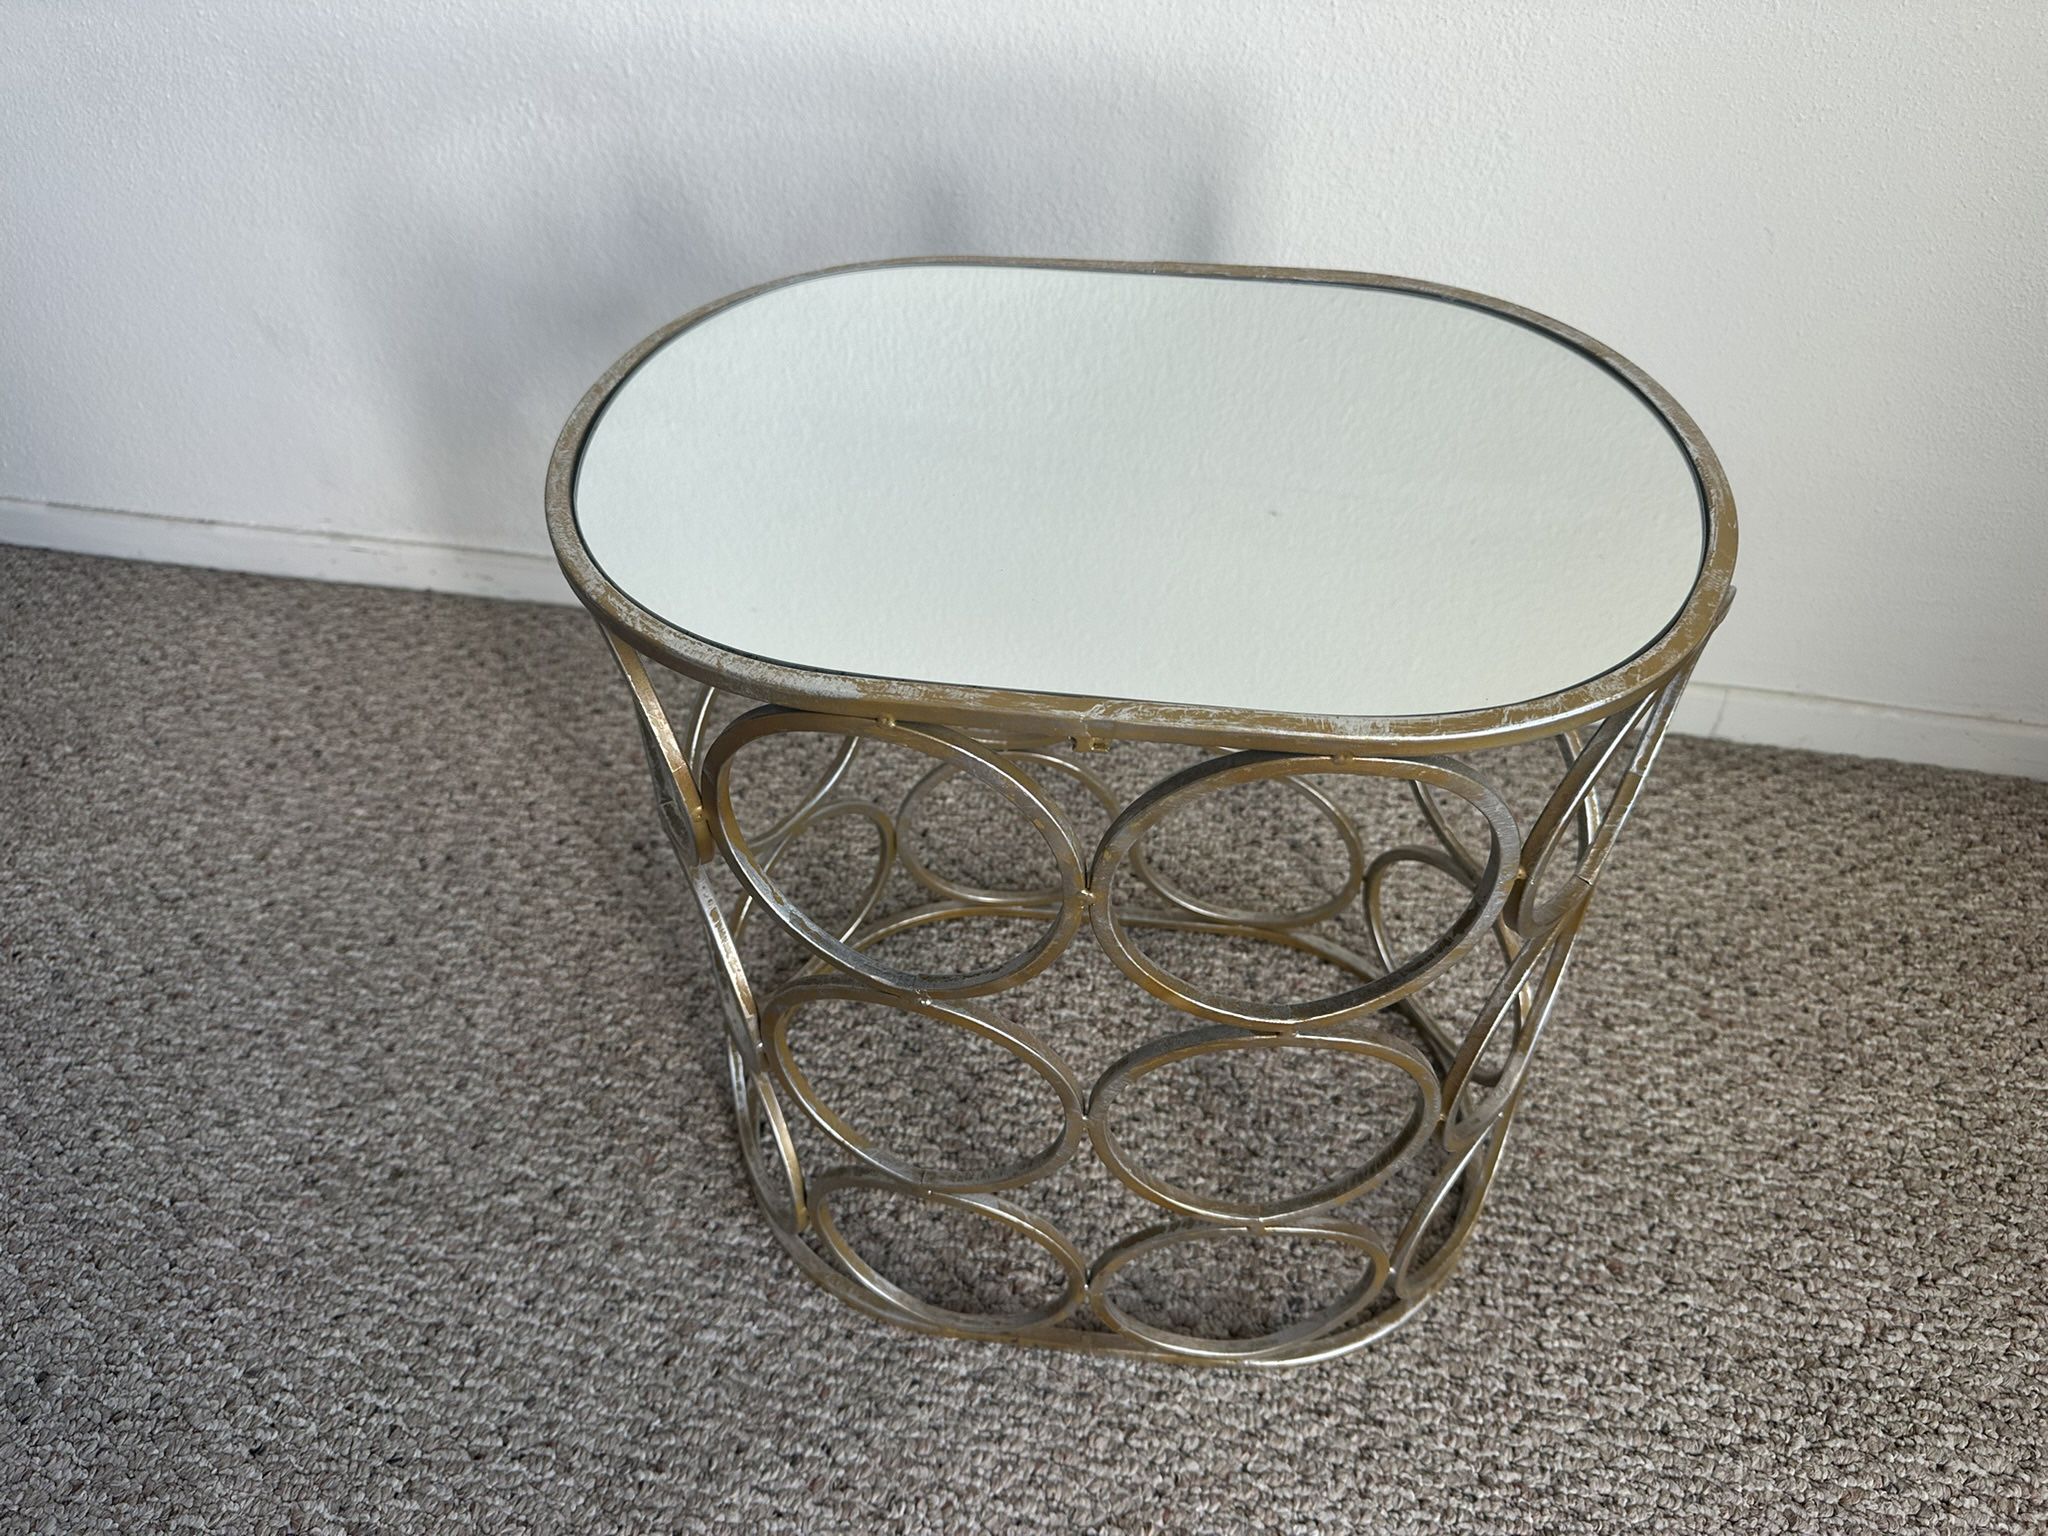 Decorative End Table With Mirror Surface